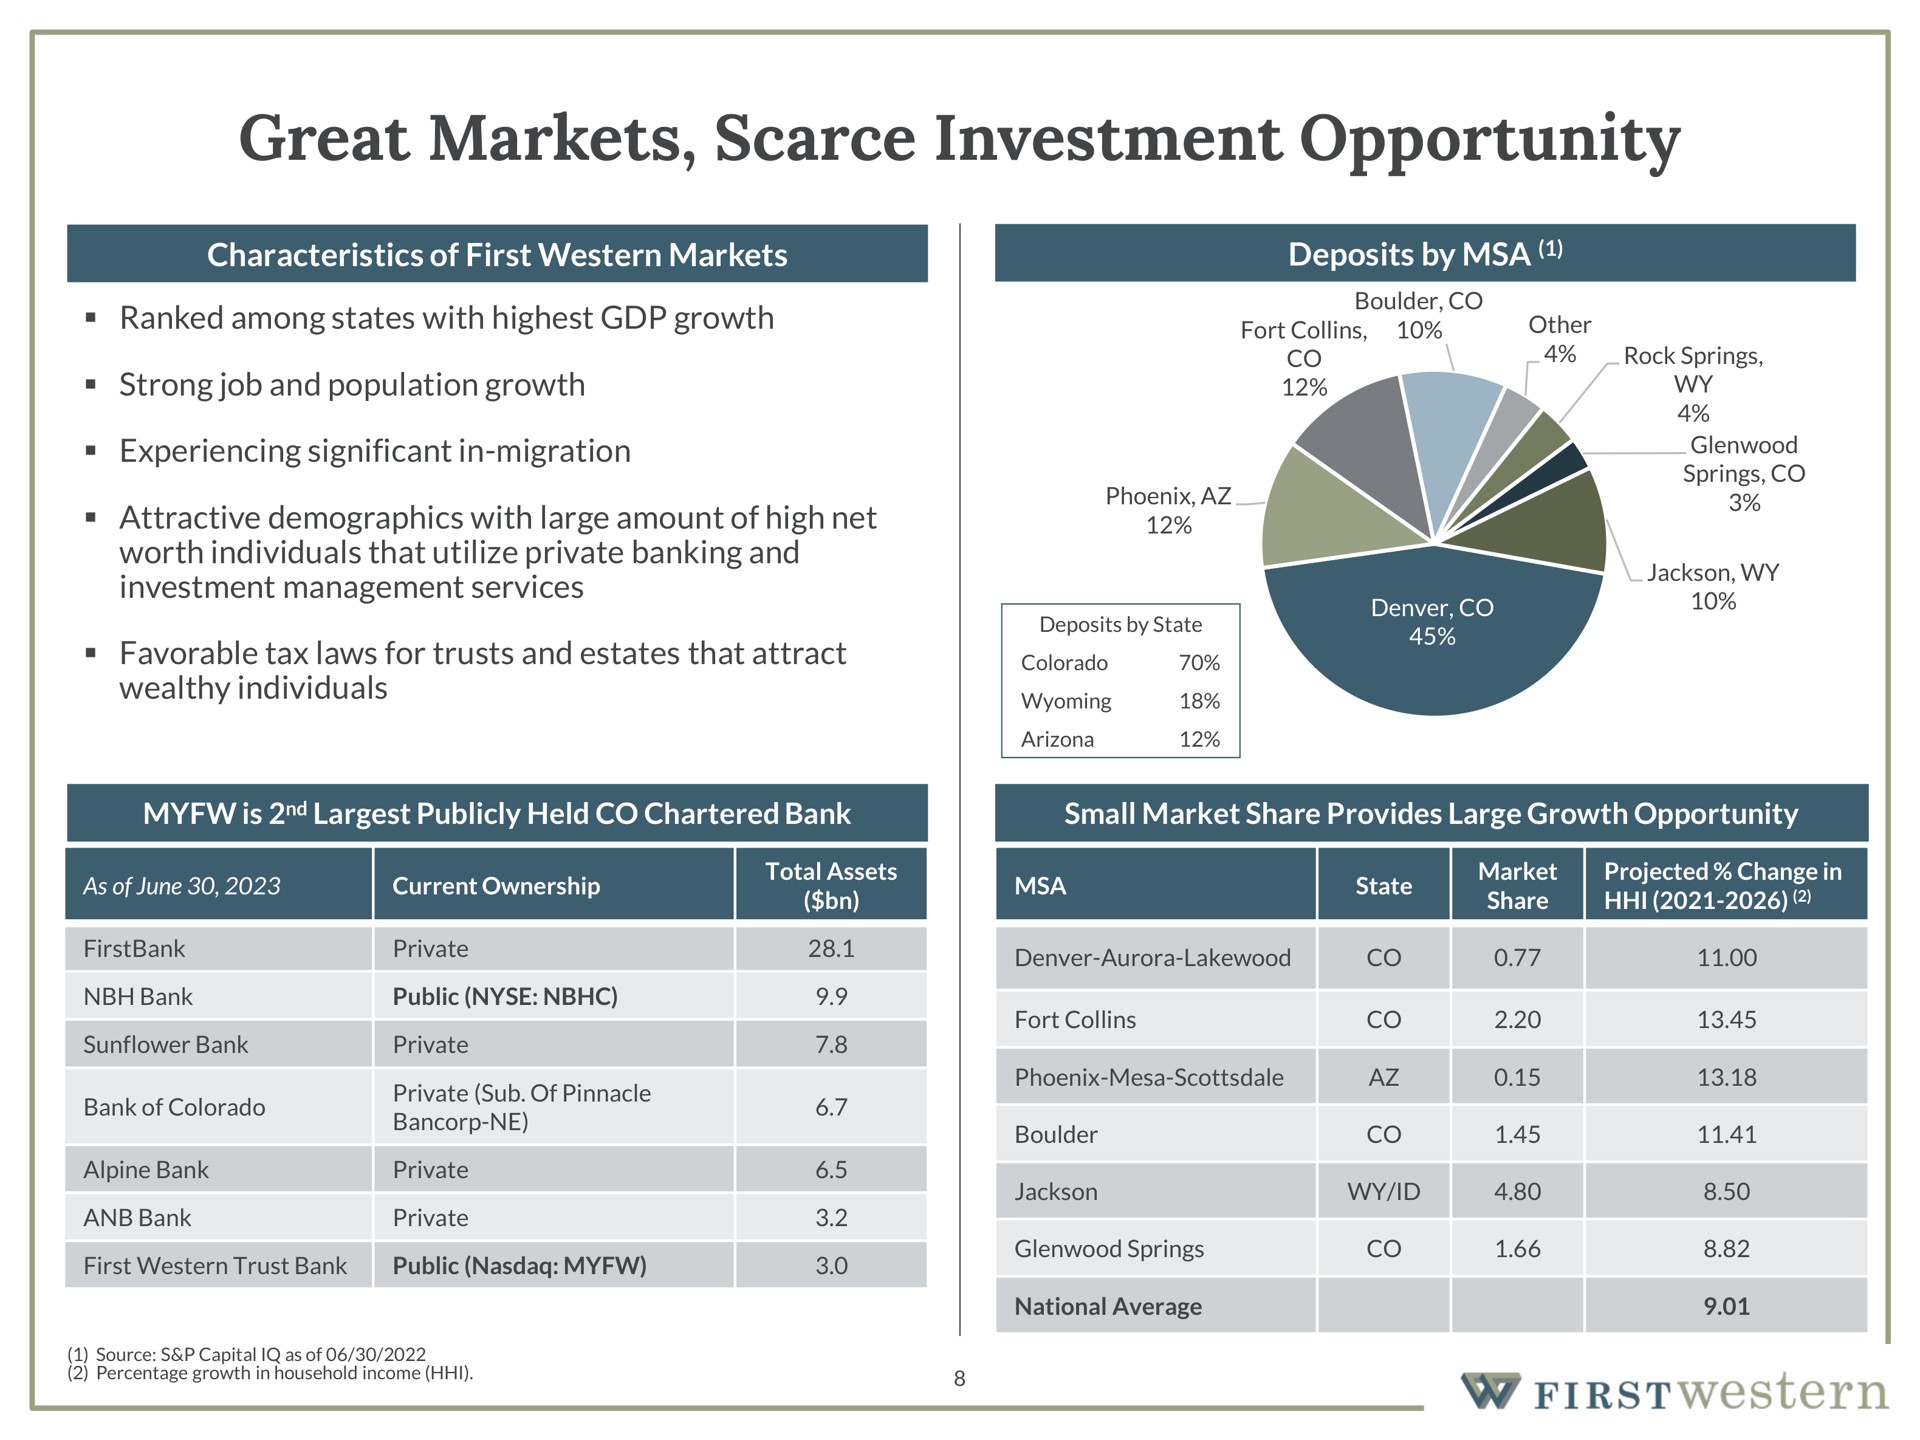 great markets scarce investment opportunity | First Western Financial